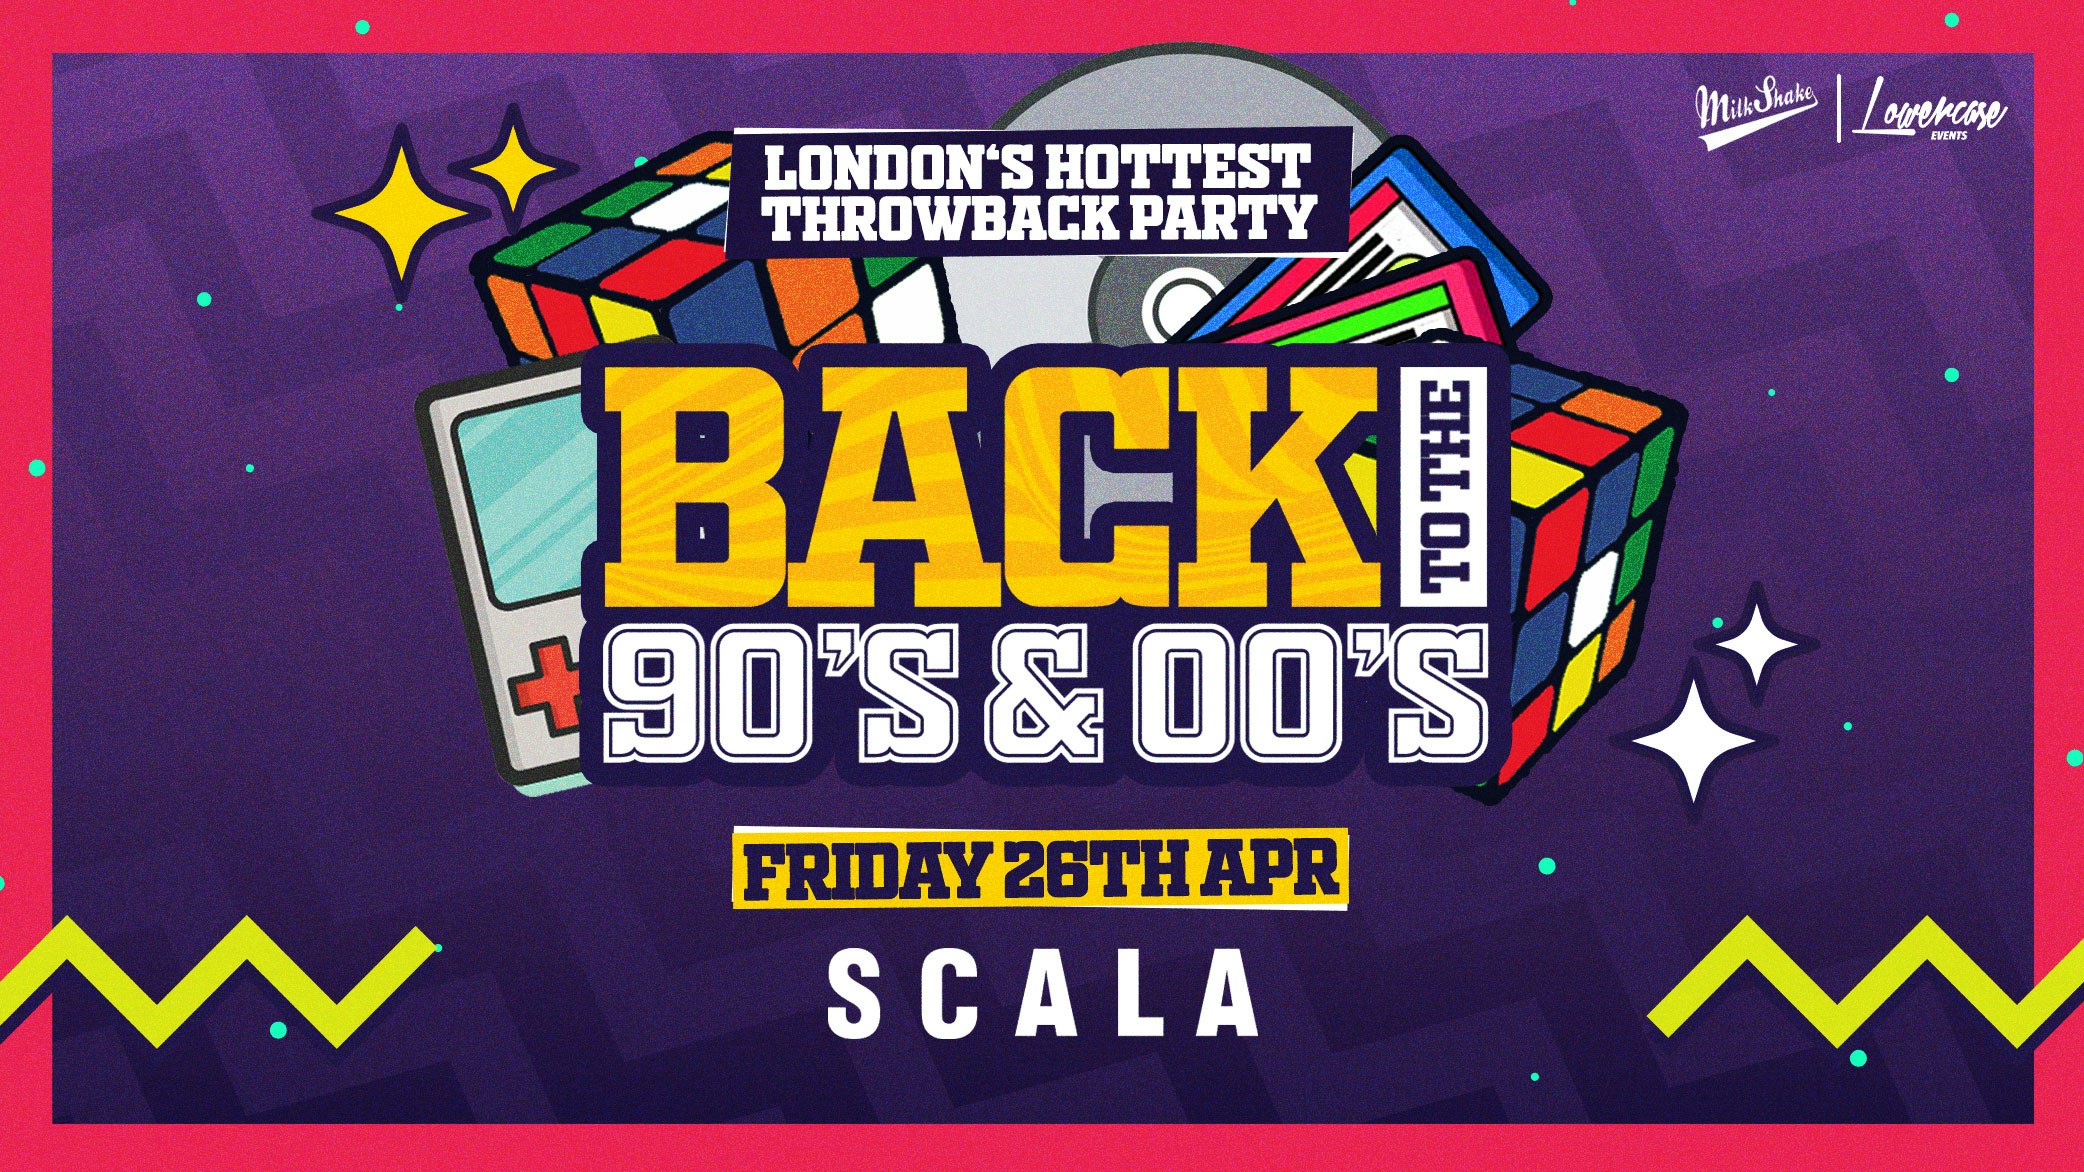 TONIGHT 10PM! – Back To The 90’s & 00’s – London’s ORIGINAL Throwback Session at Scala